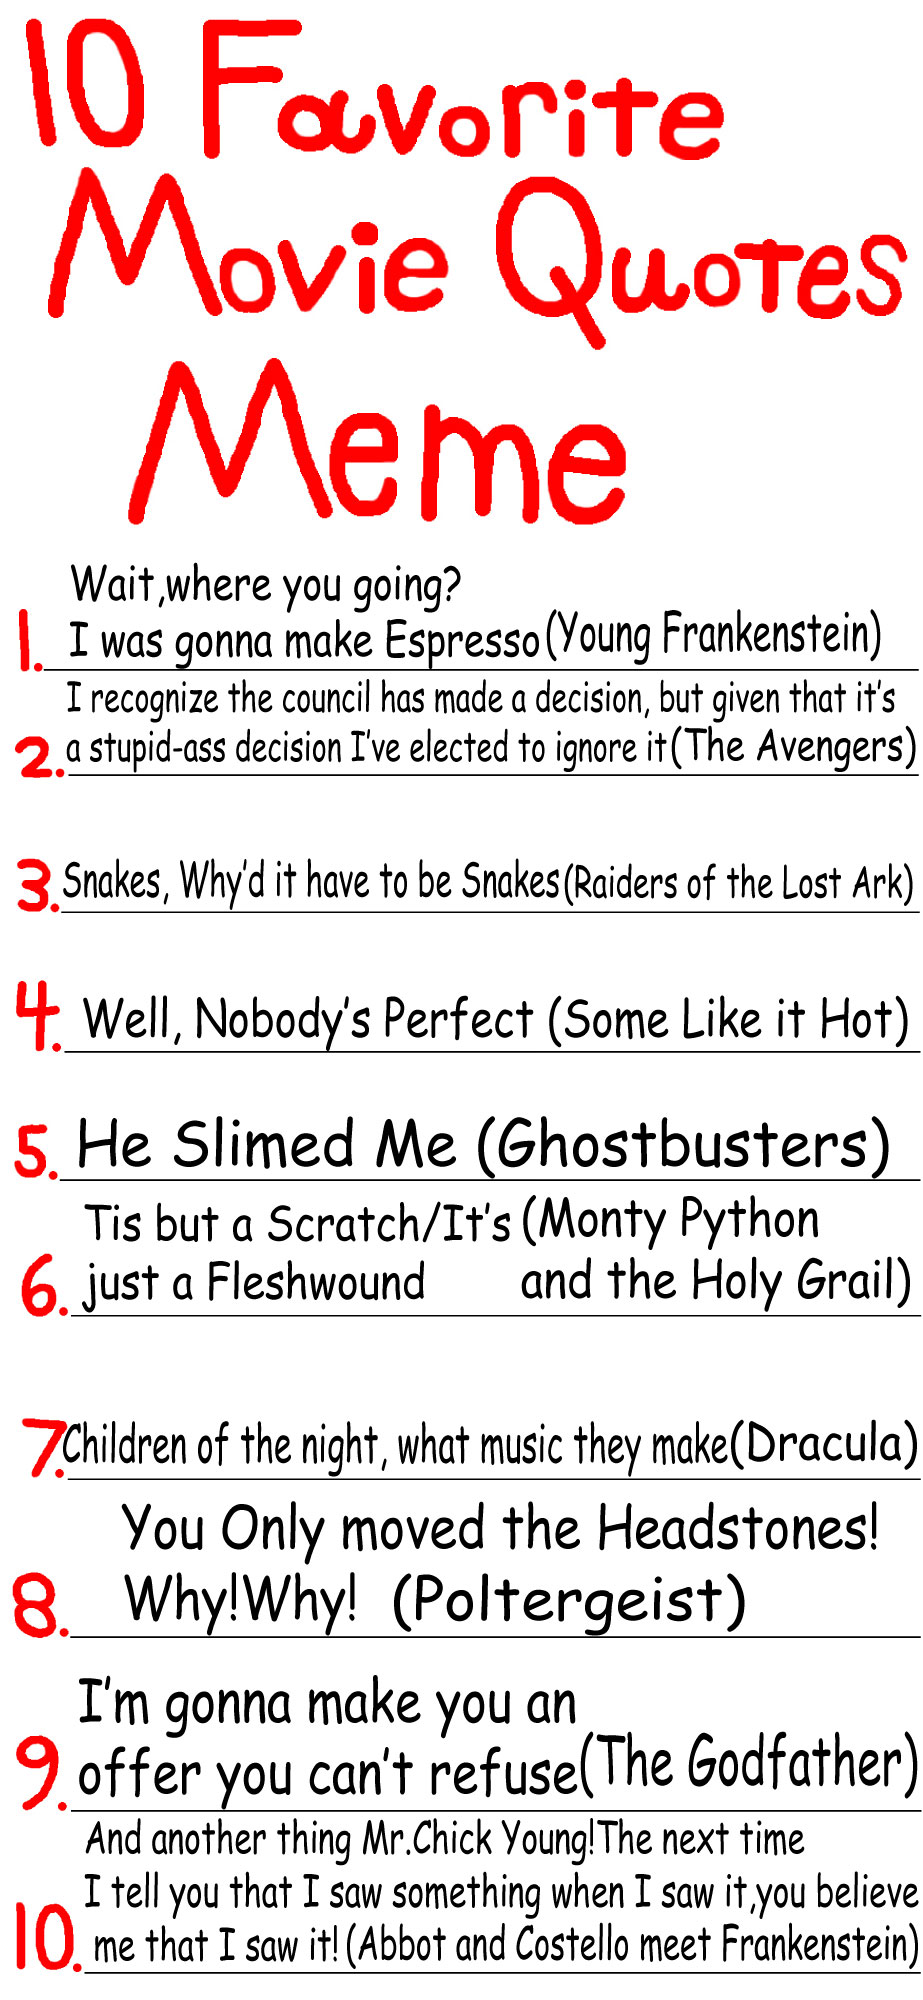 10 Favorite Movie Quotes Meme filled by TandP on DeviantArt